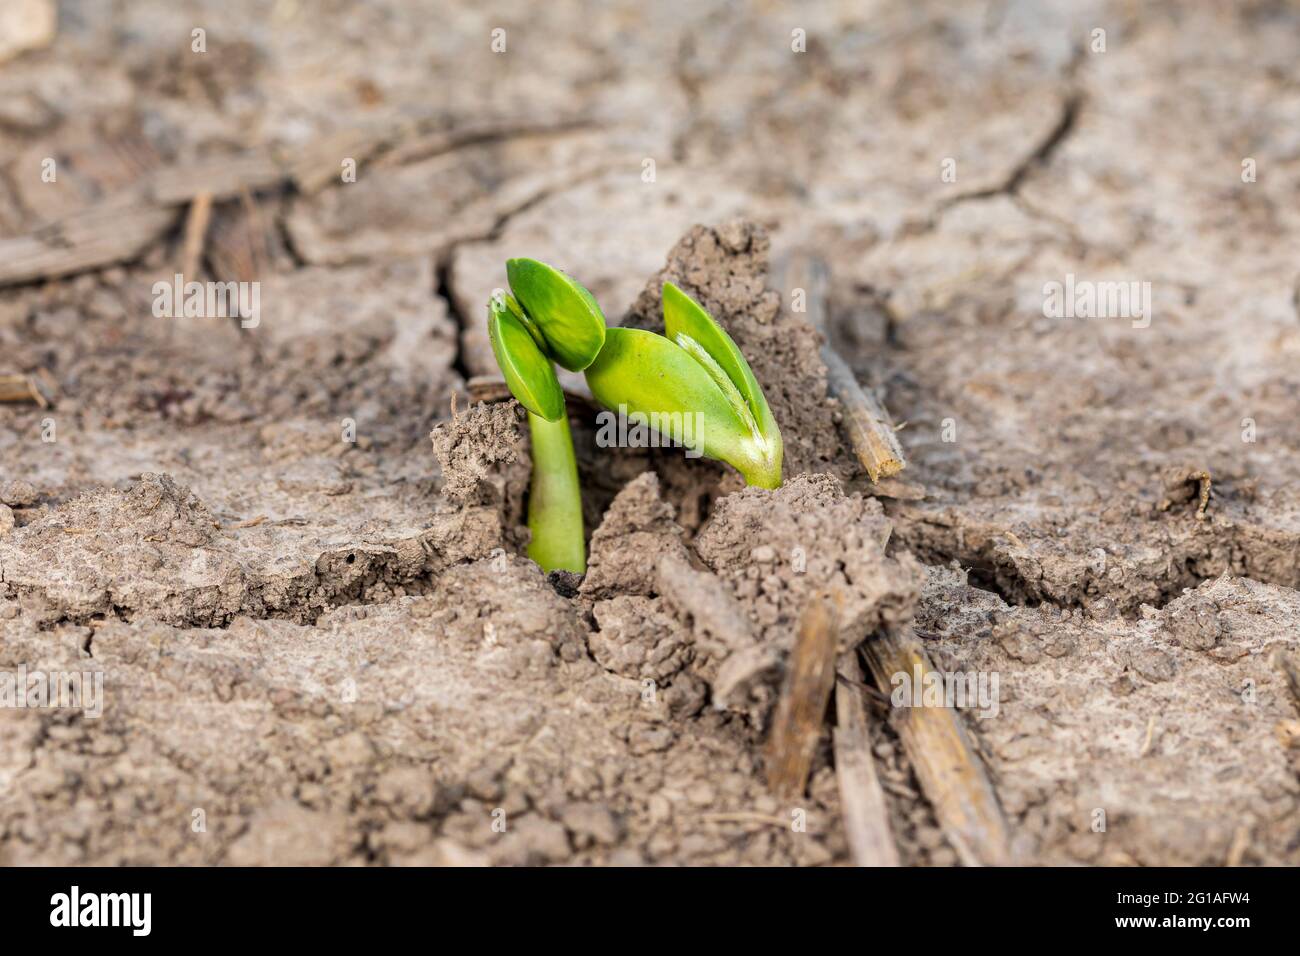 Soybean plant emerging in farm field. Concept of soybean planting season, precision agriculture and farming. Stock Photo